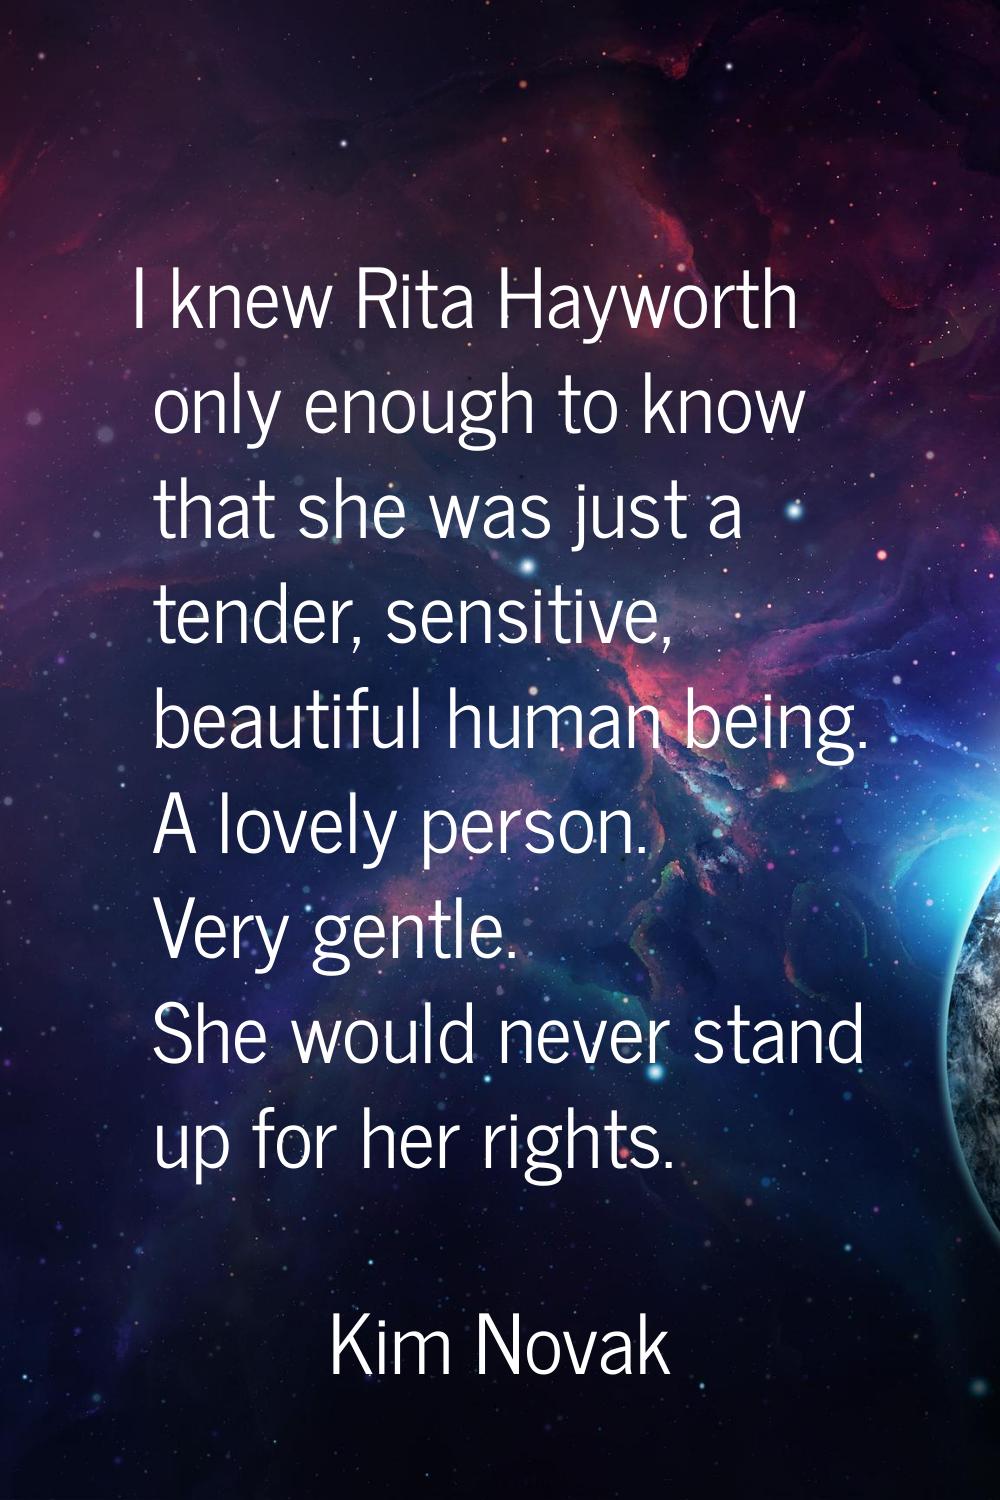 I knew Rita Hayworth only enough to know that she was just a tender, sensitive, beautiful human bei